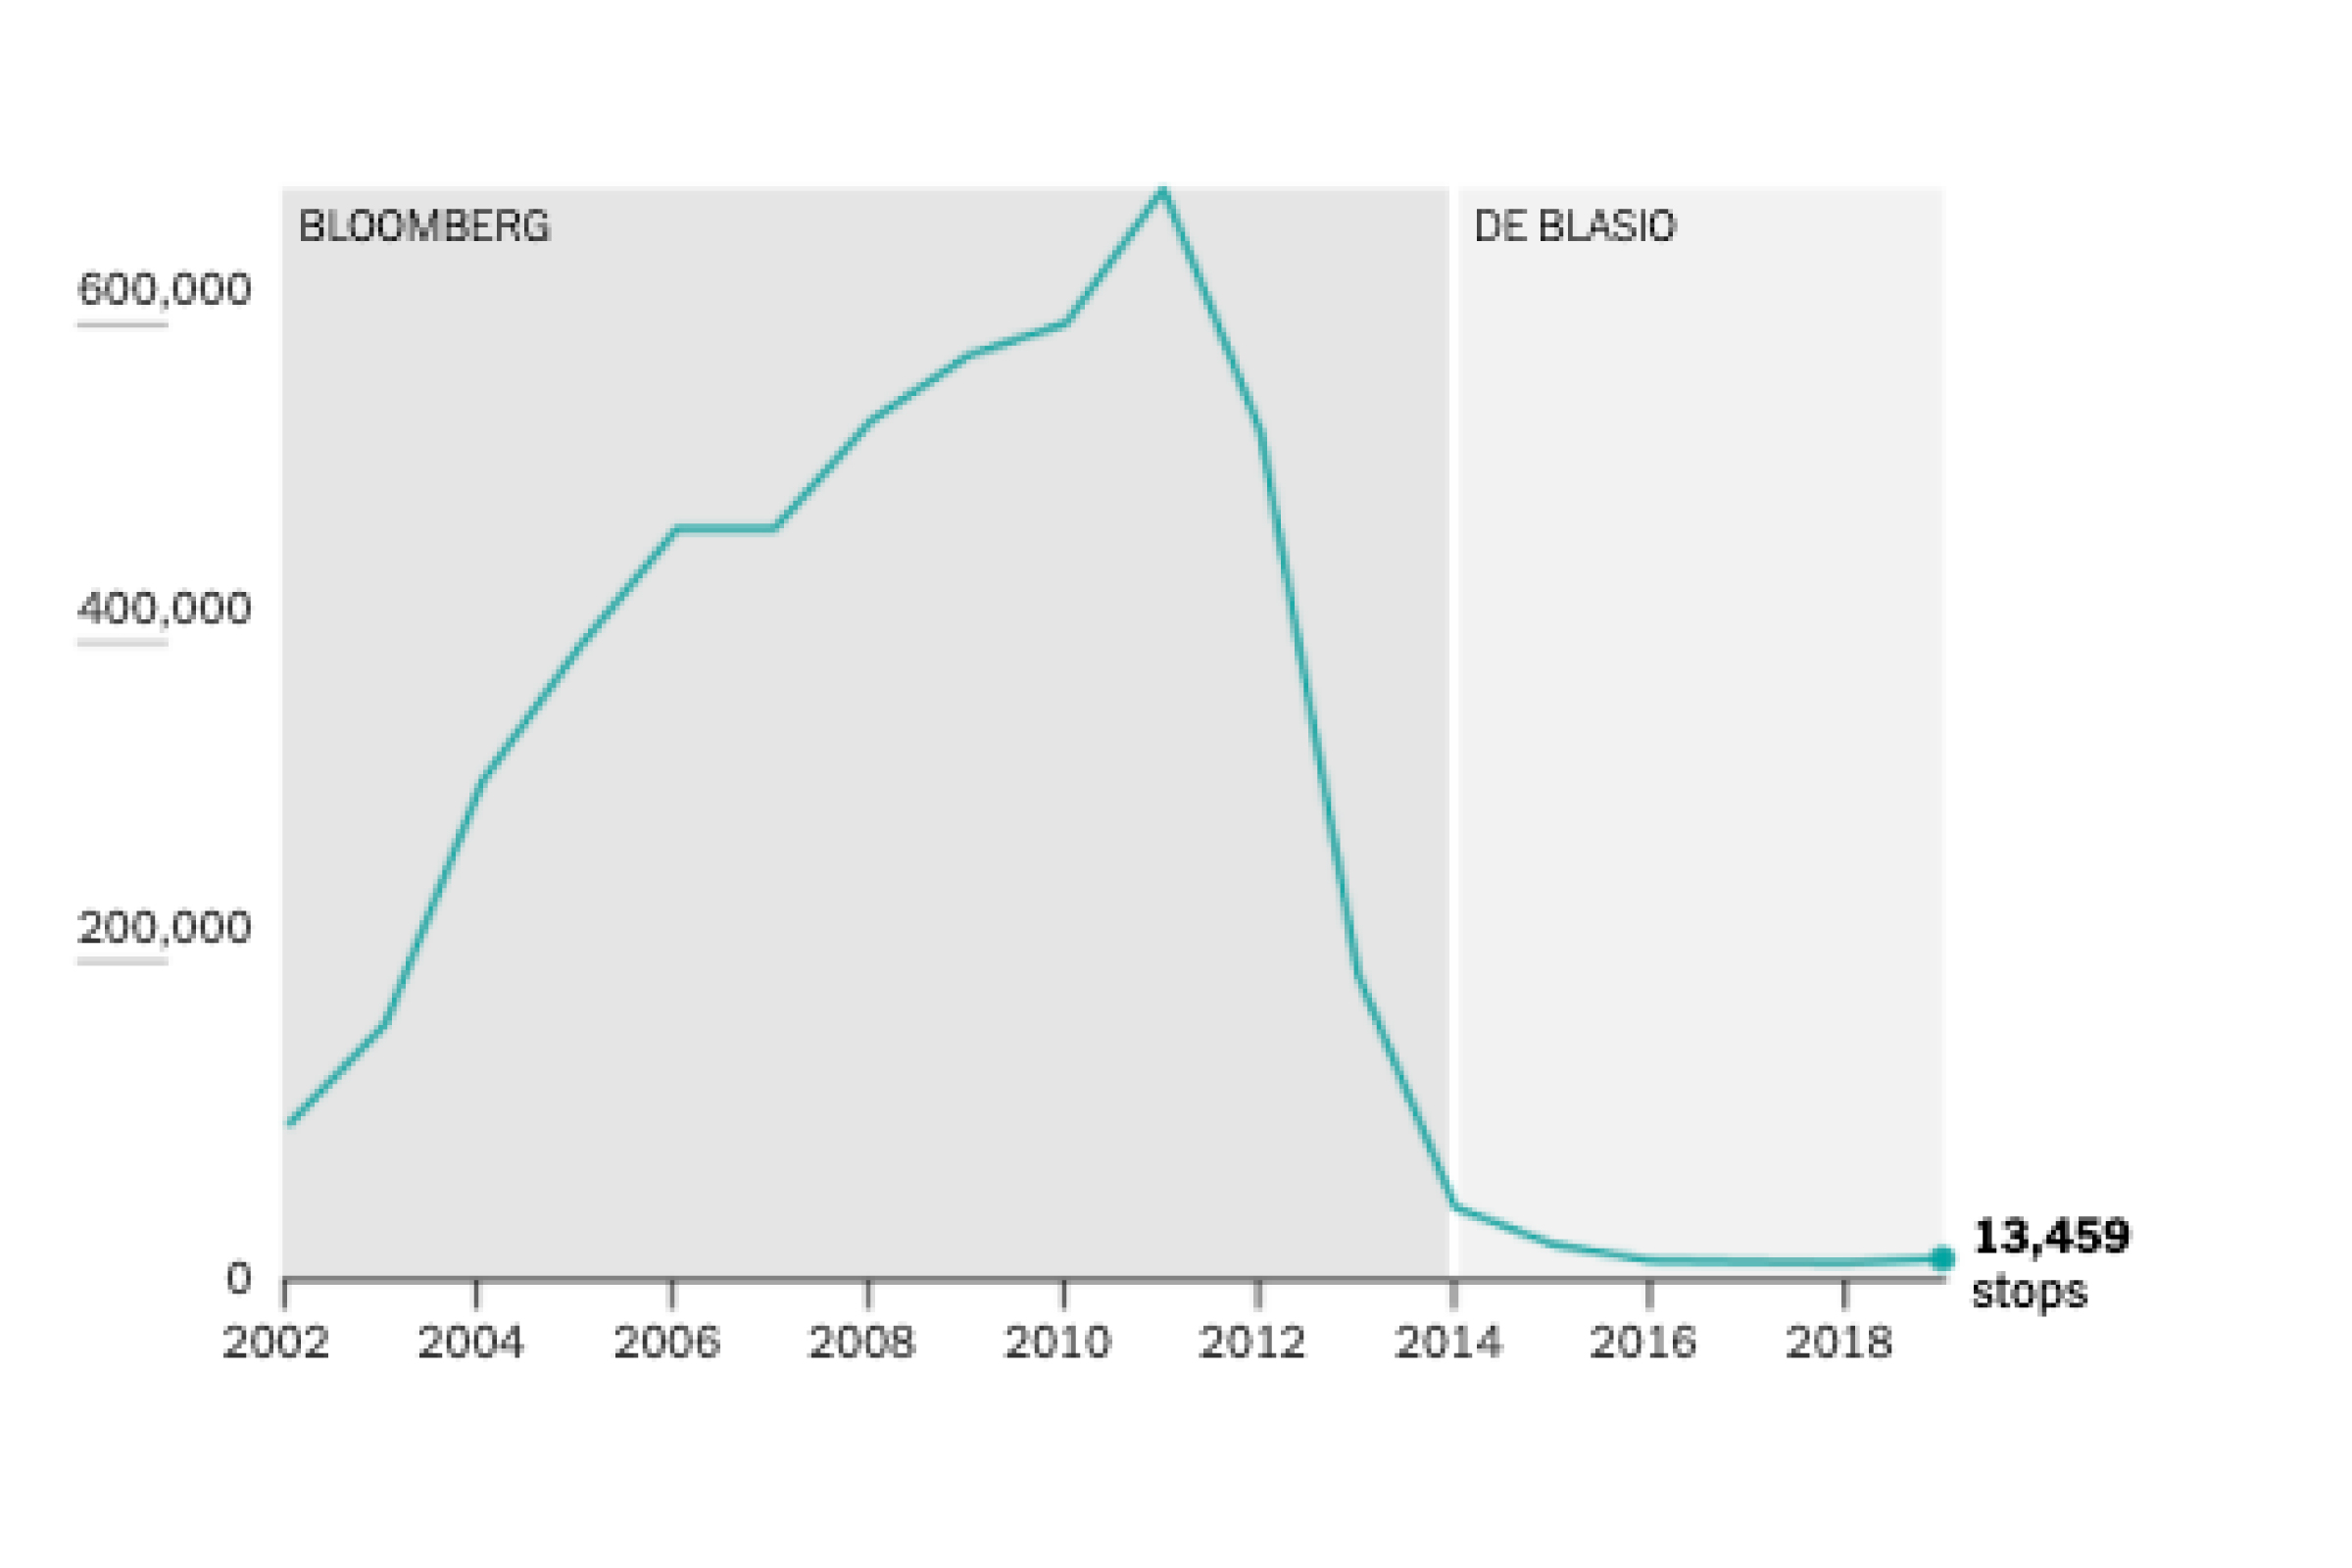 Line chart of stop-and-frisks during Bloombergs term and how they decreased during de Blasio's.